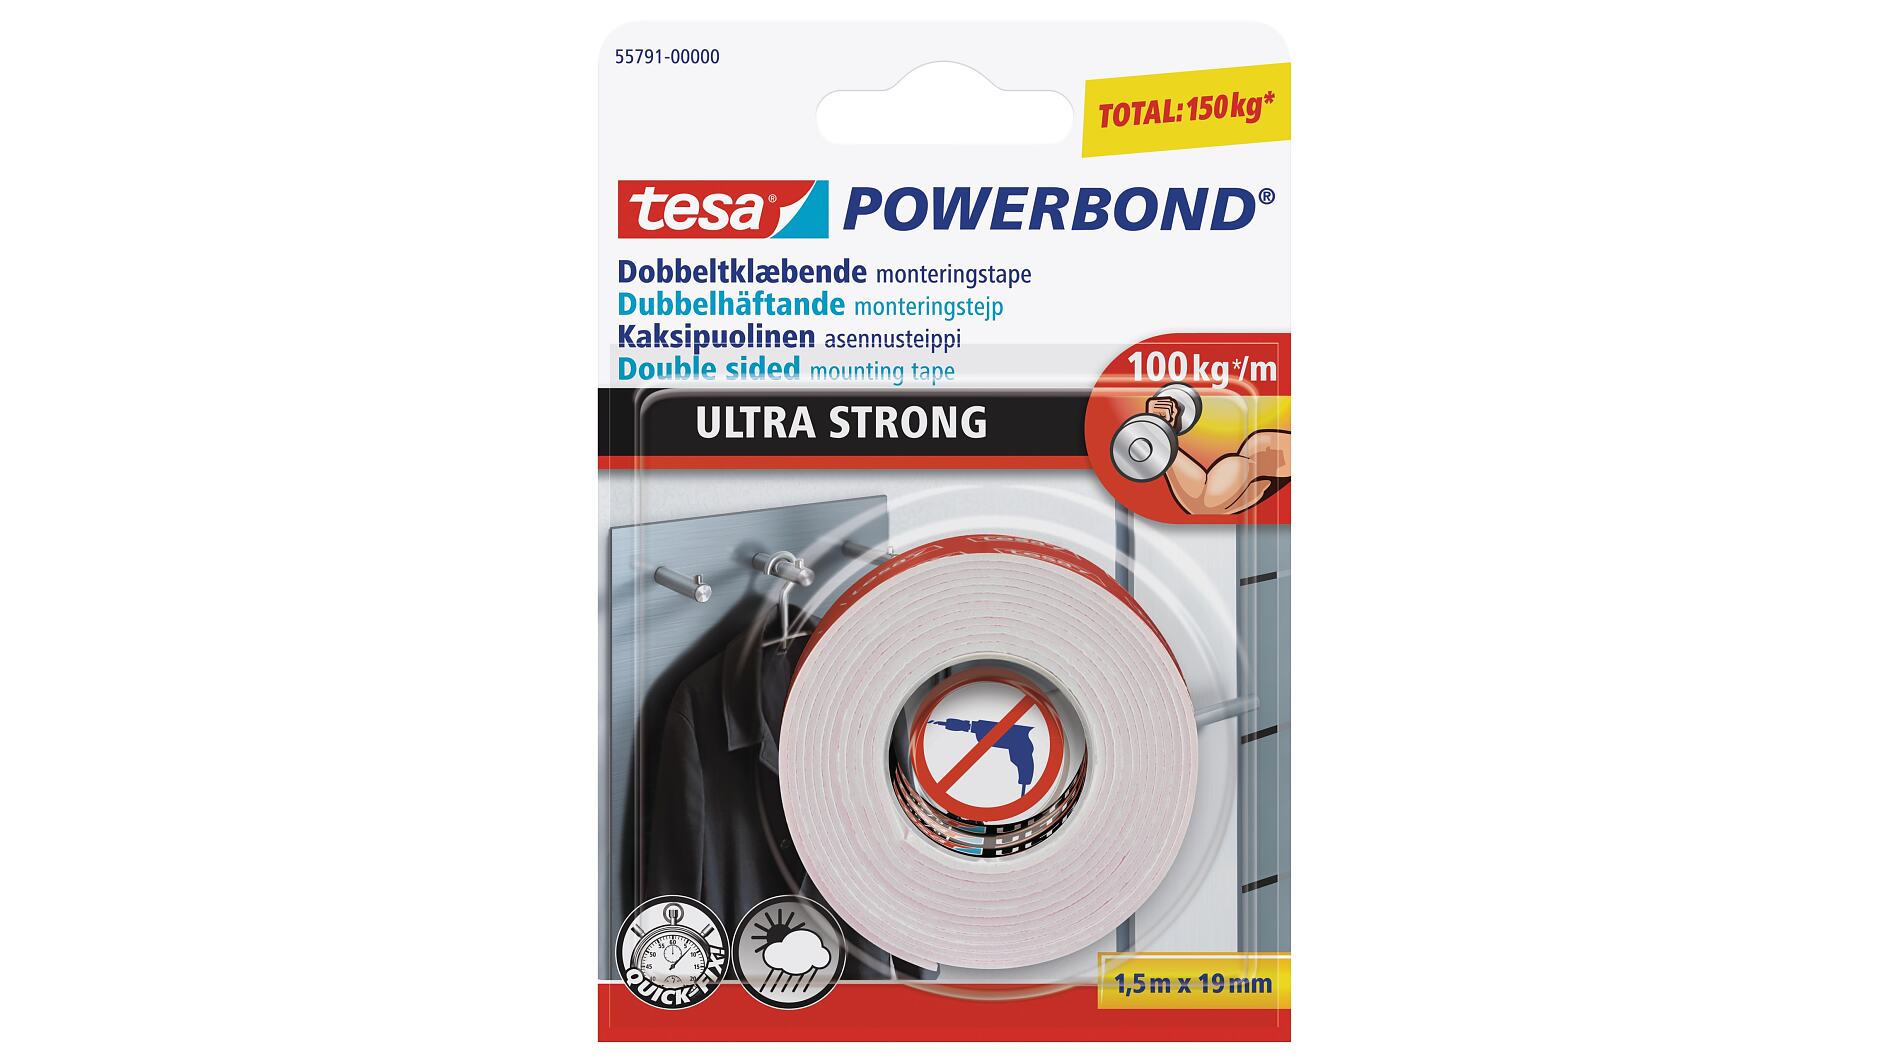 Heavy Duty Mounting Pad - Double Sided Adhesive (2 per pkg.) 